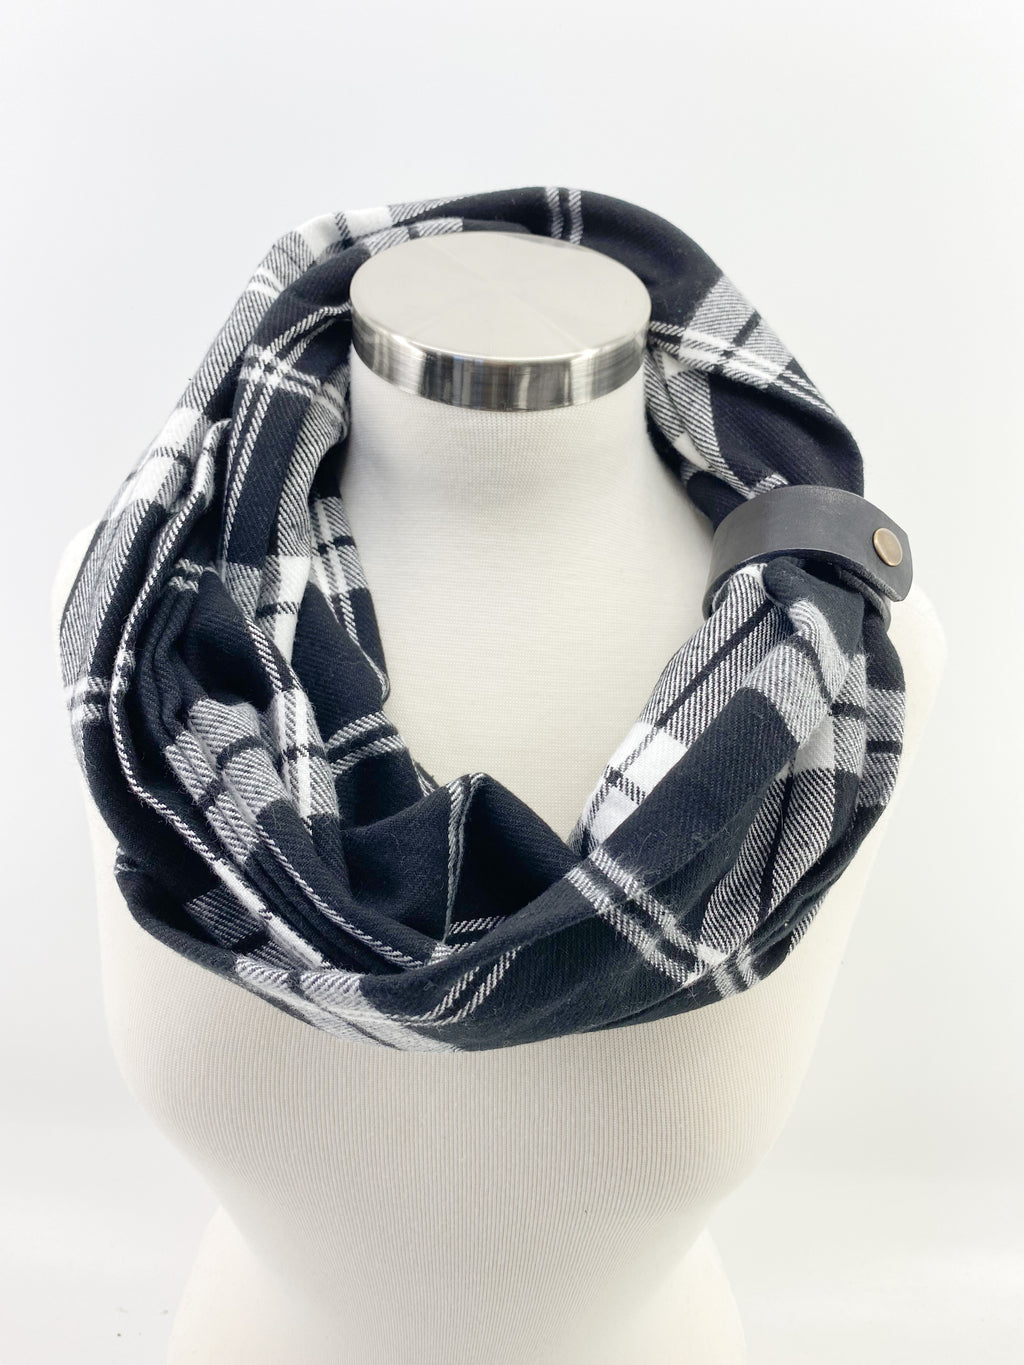 Black & White  Plaid Eternity Scarf with a Leather Cuff